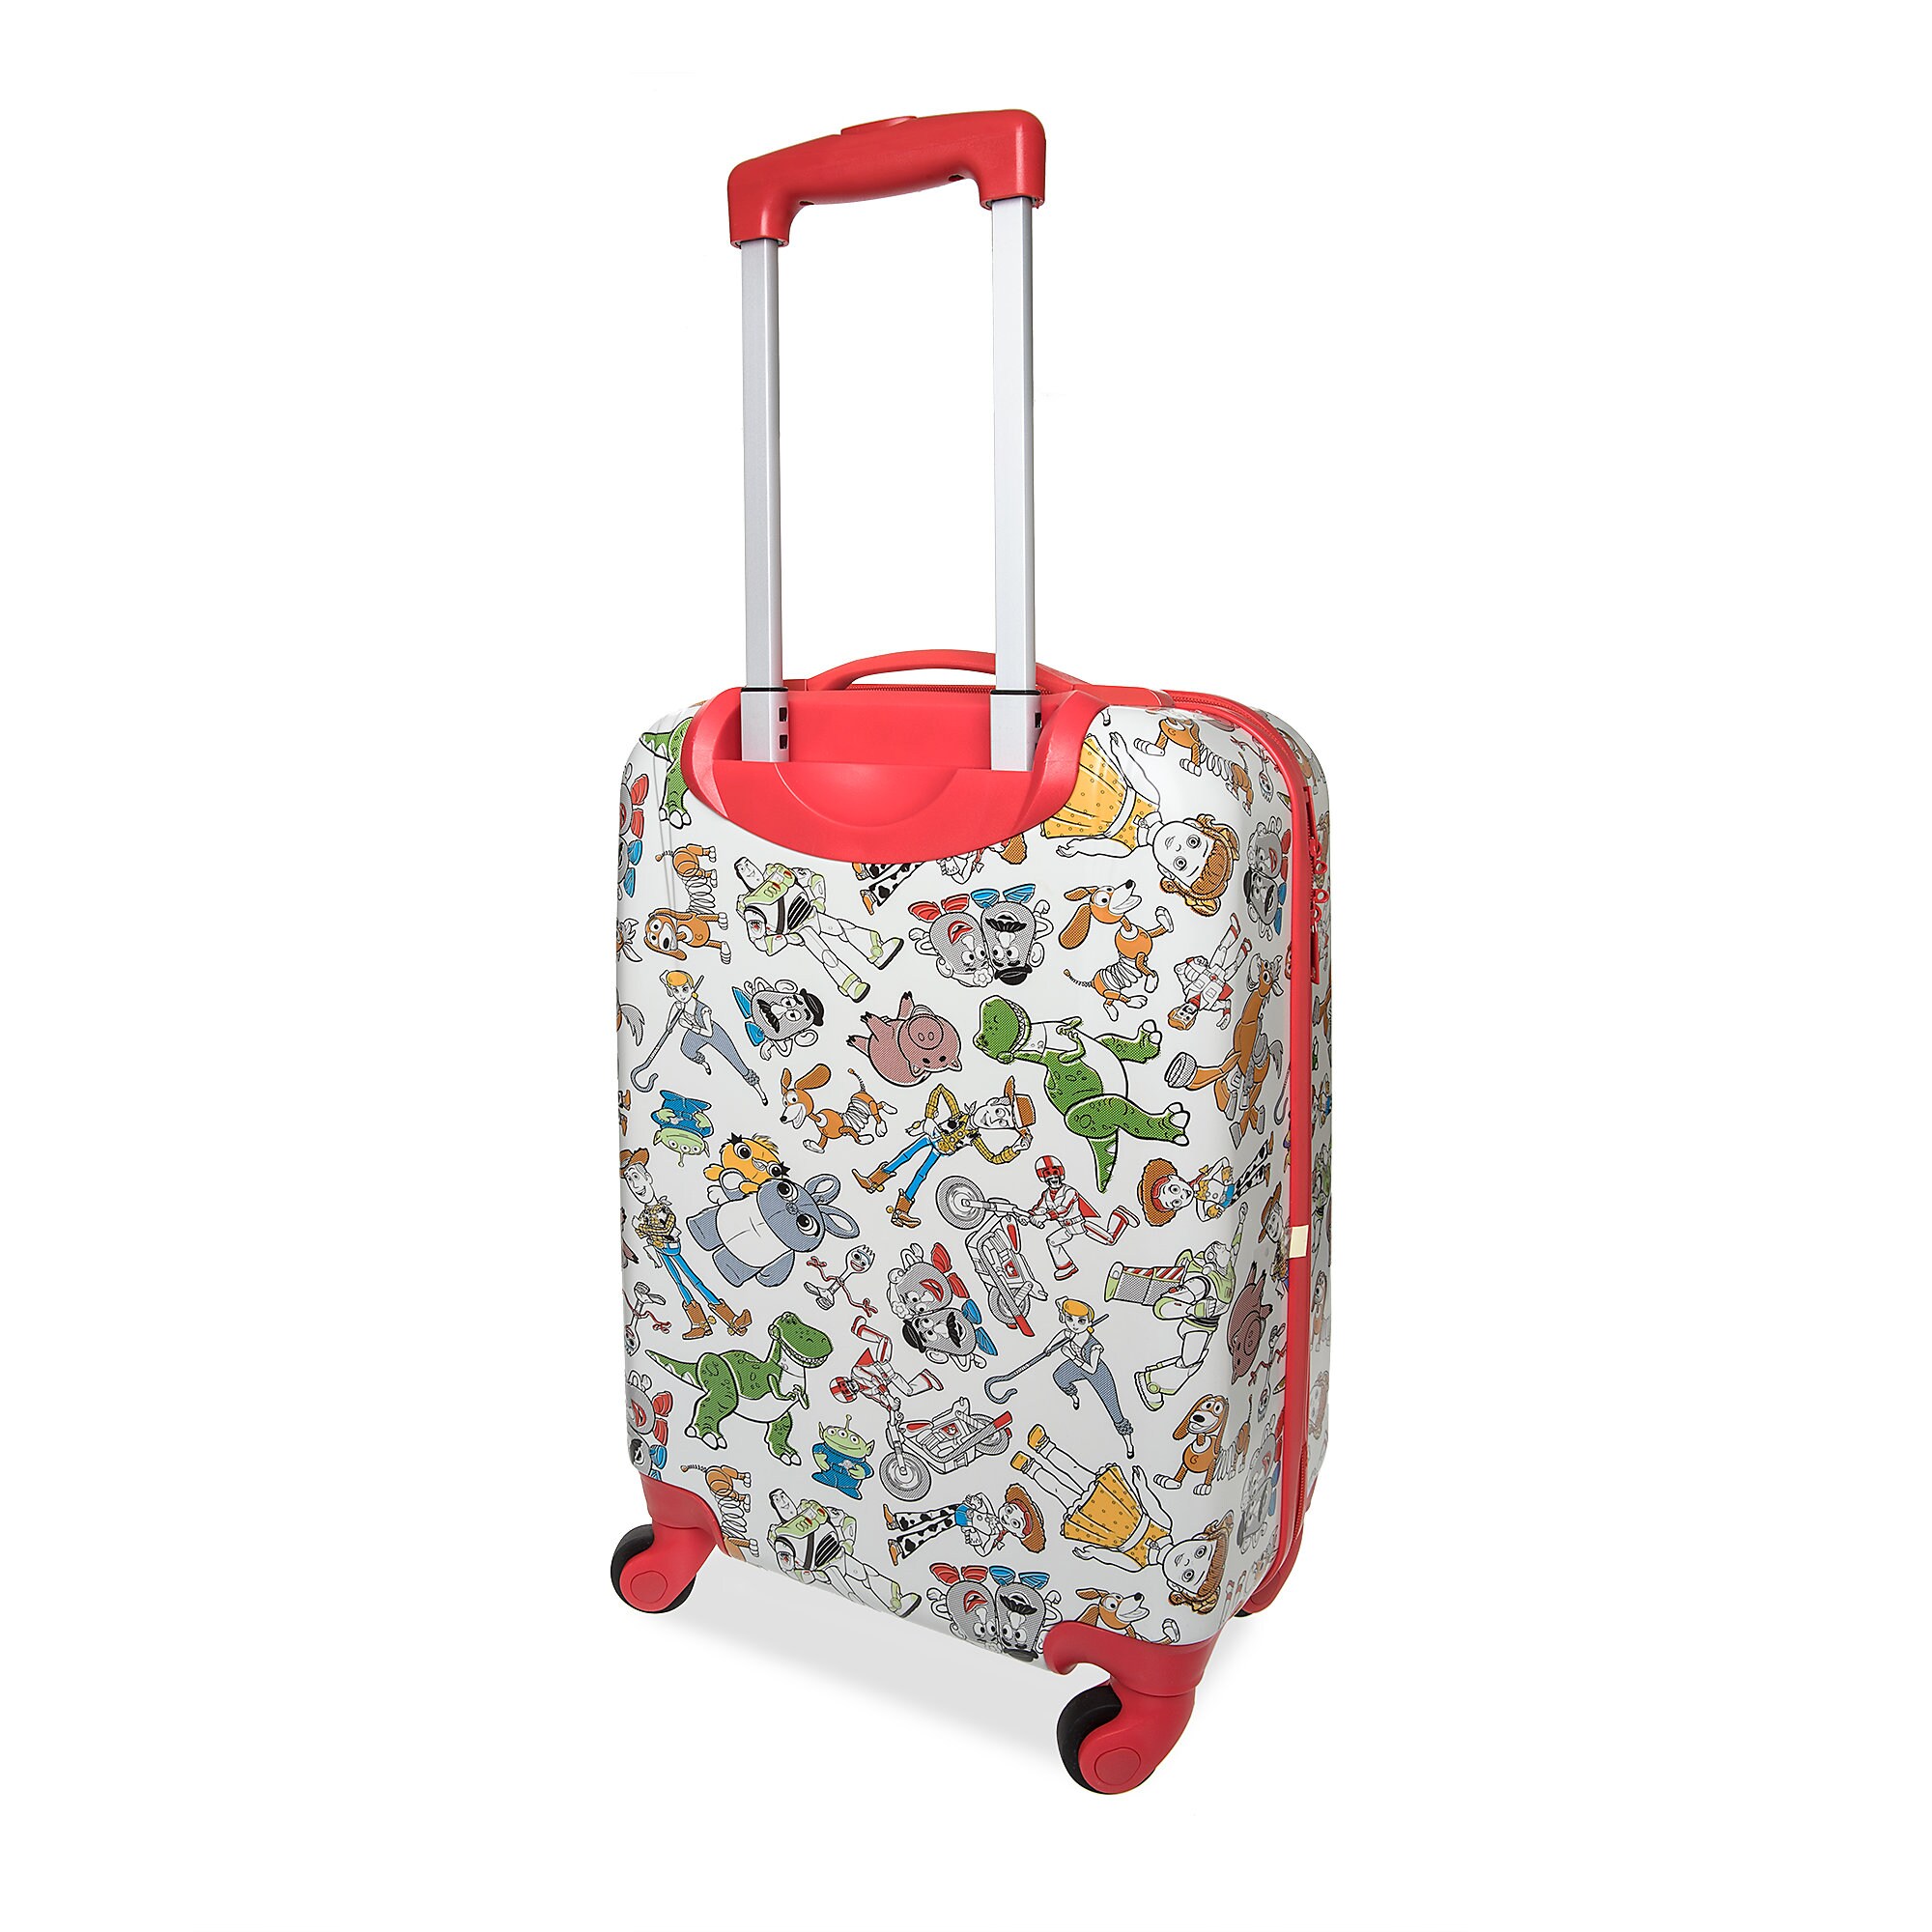 Toy Story 4 Rolling Luggage - Small